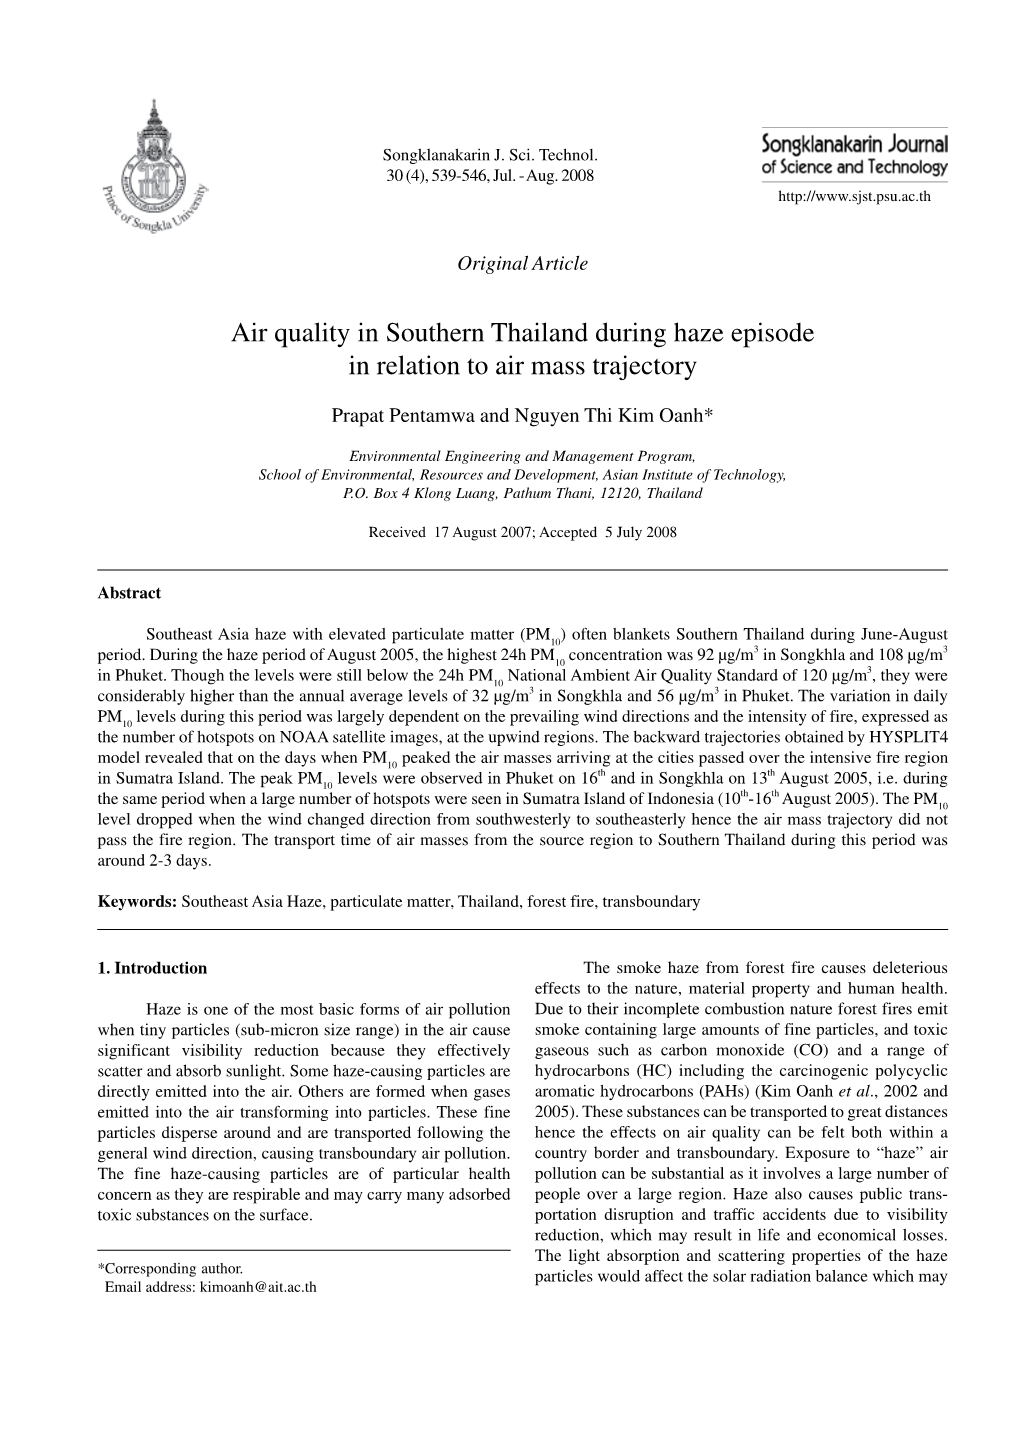 Air Quality in Southern Thailand During Haze Episode in Relation to Air Mass Trajectory